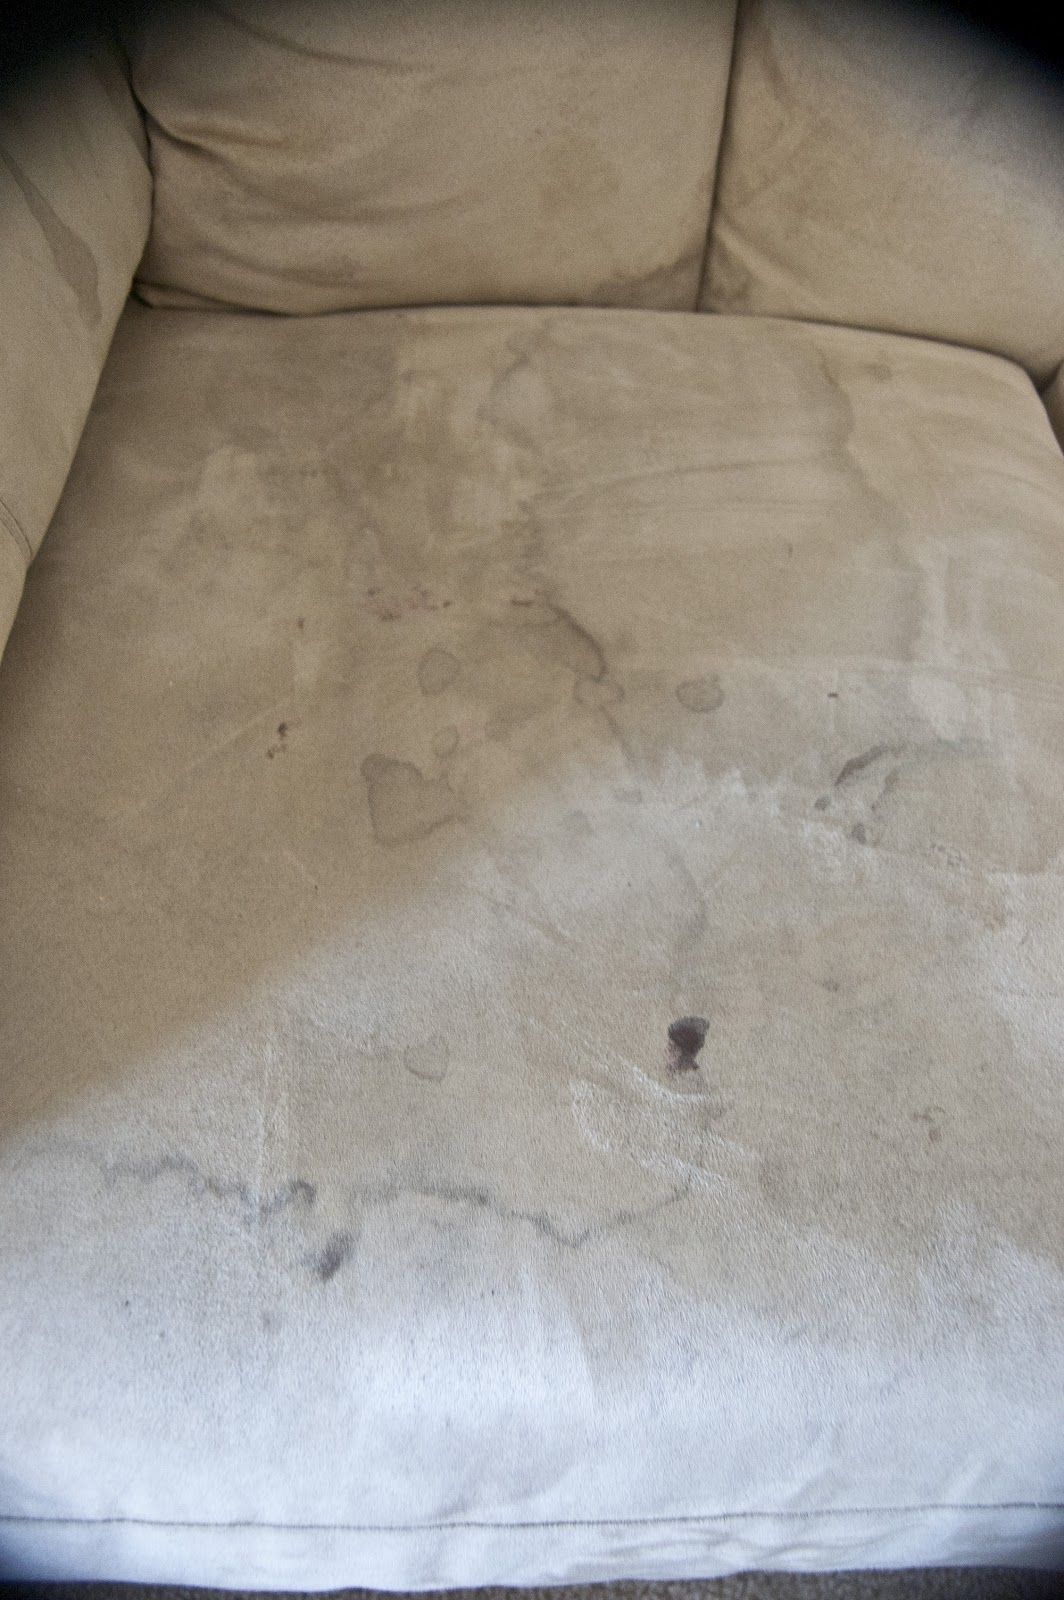 How to remove stains from a microfiber couch. I'll be glad I pinned this lat